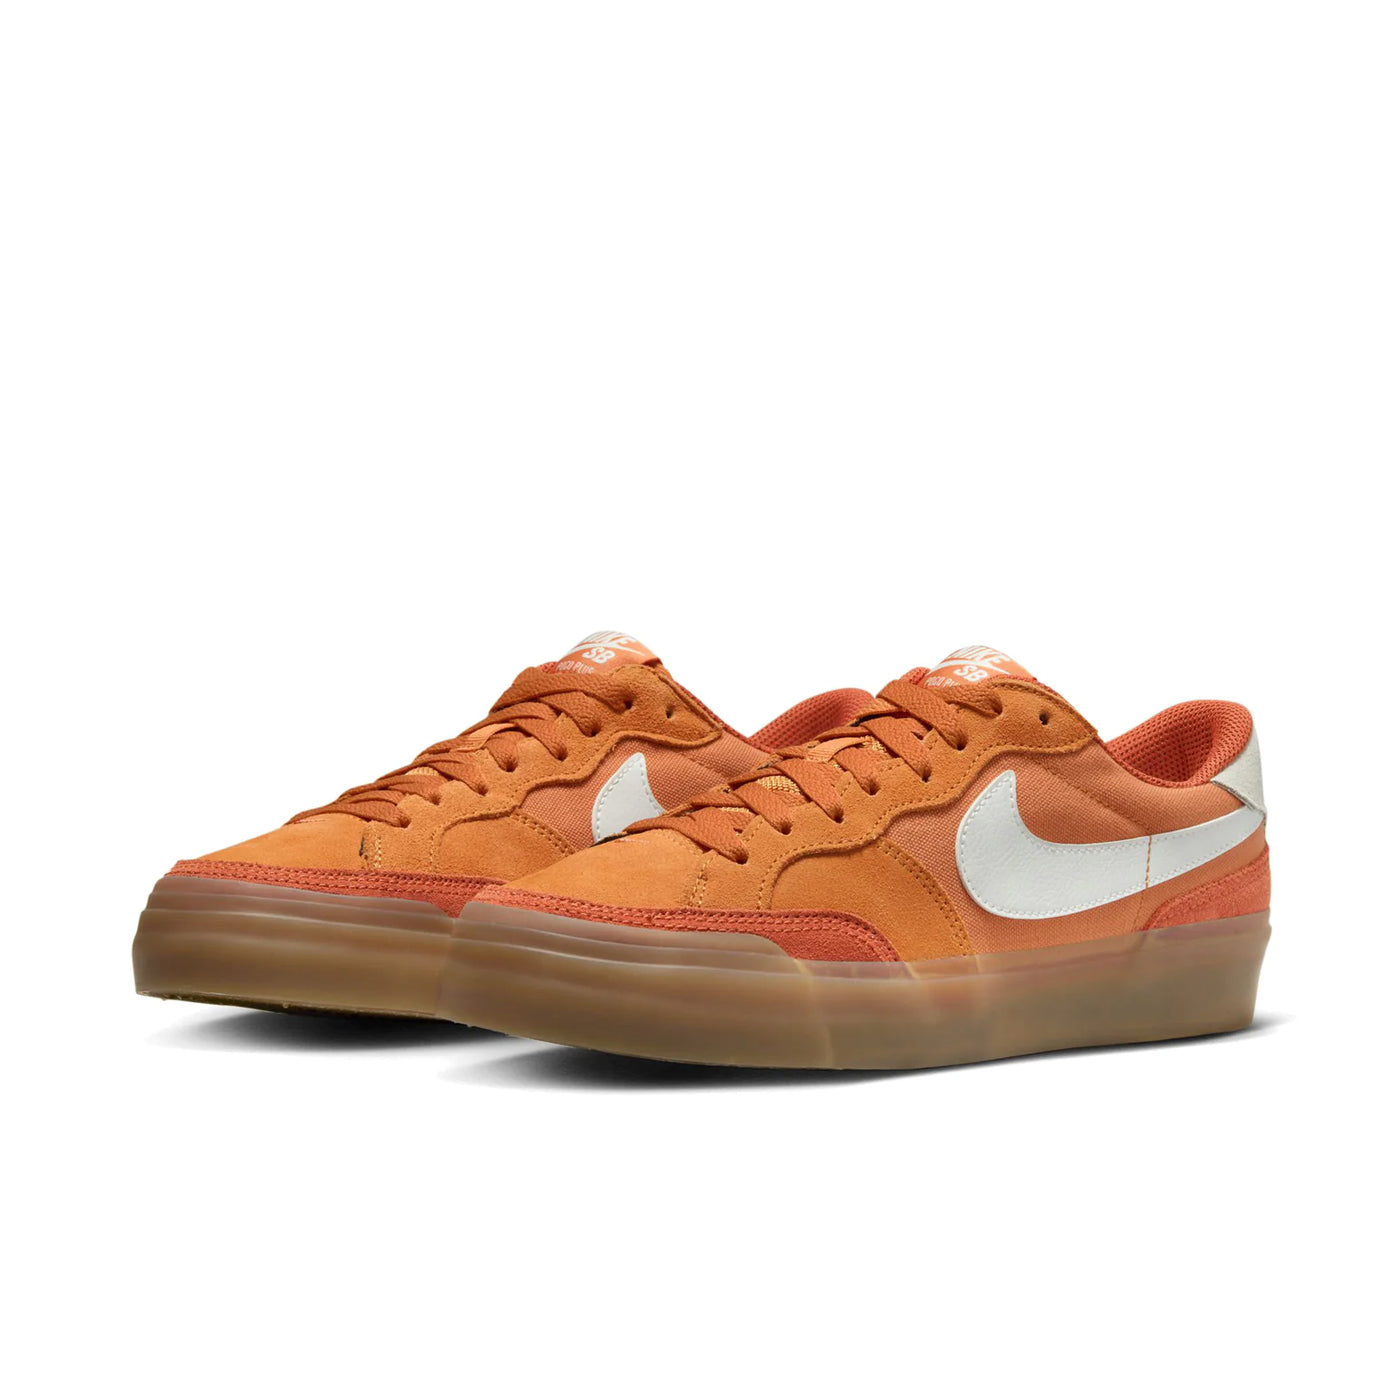 Low top Nike SB Pogo Plus skate shoe in monarch orange colour, with a gum sole and white nike swoosh on sides.